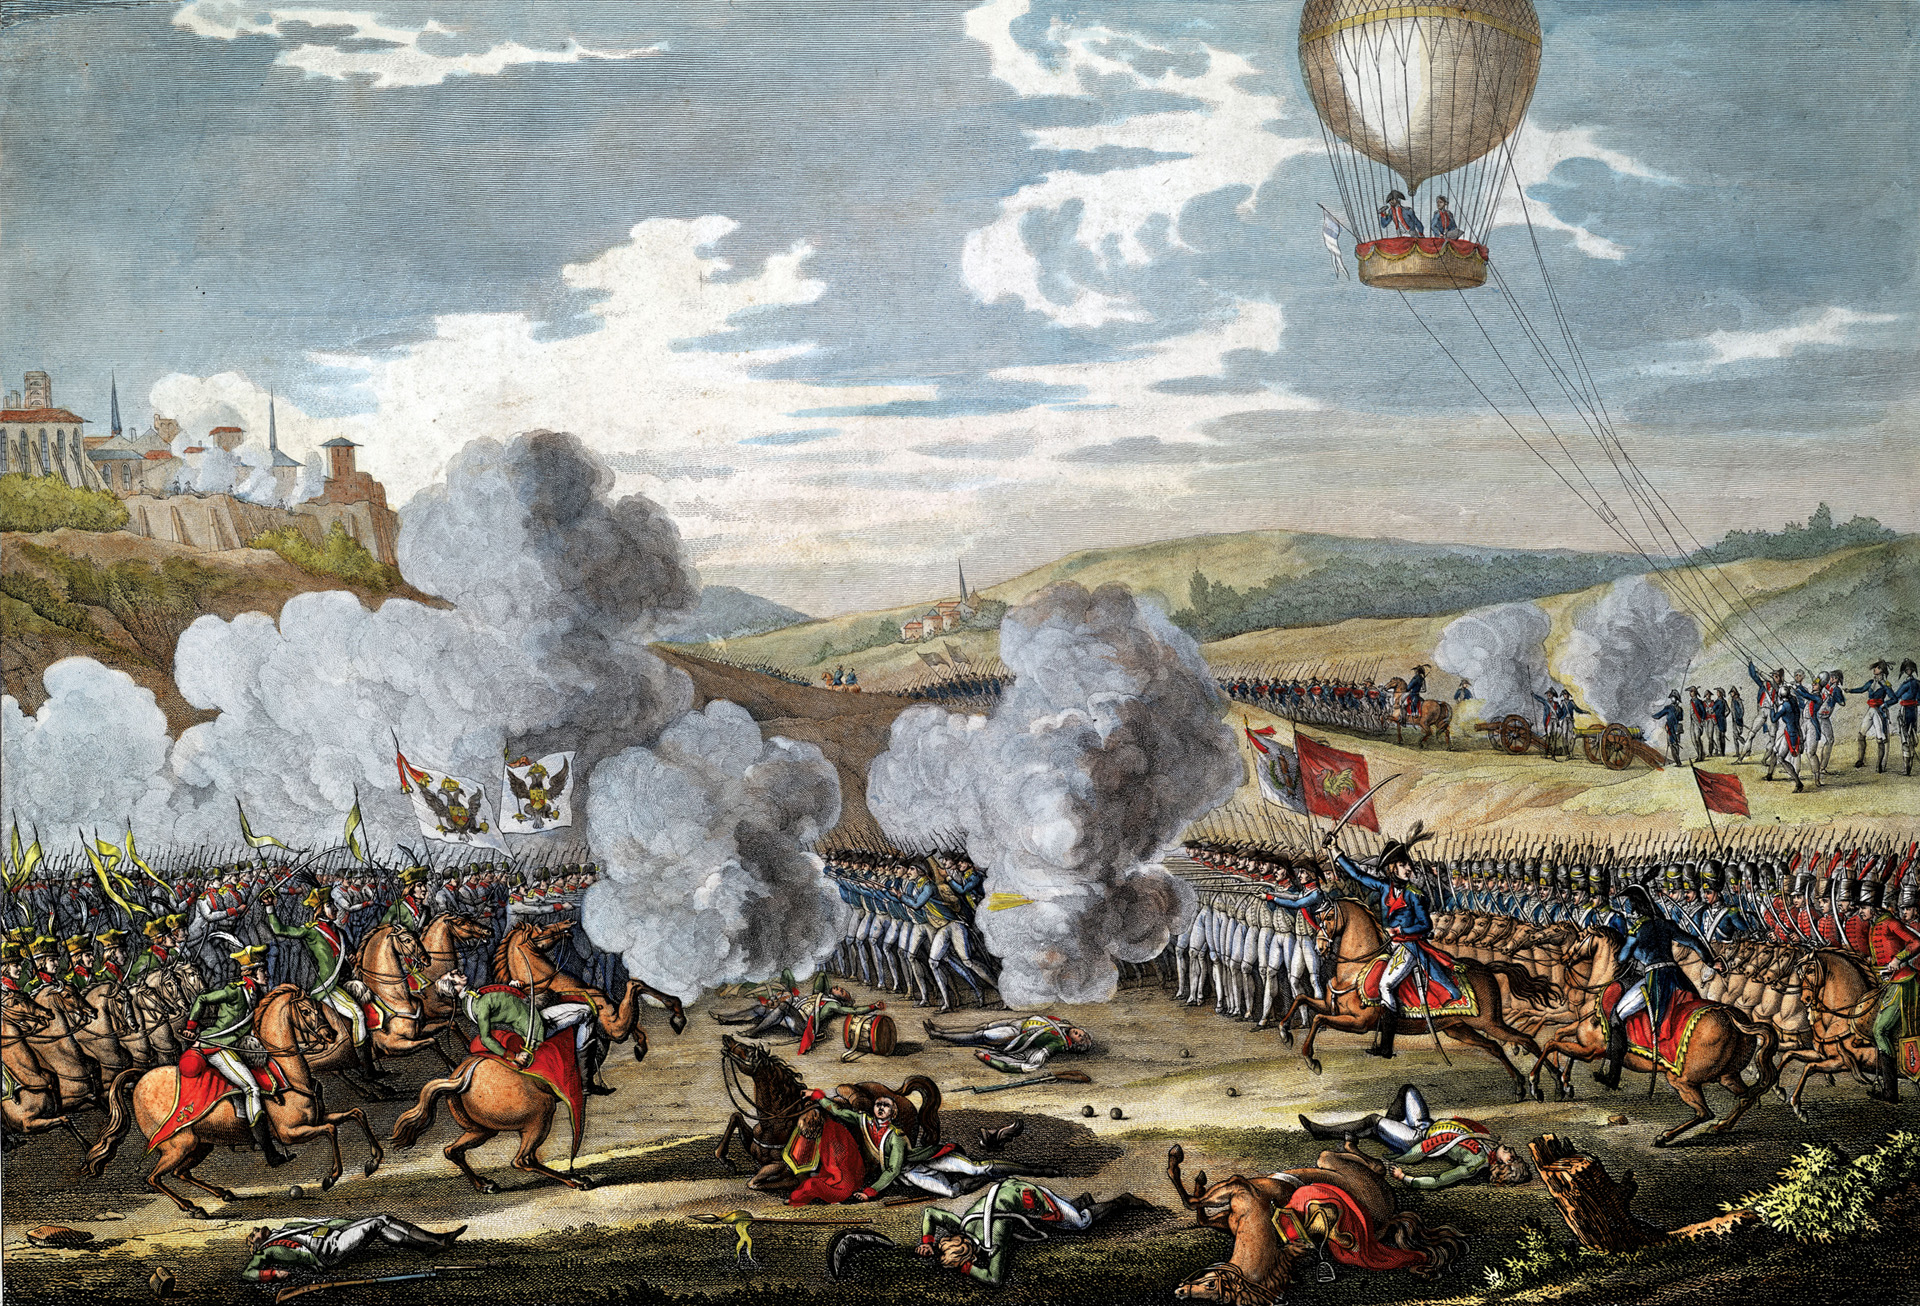 French Captain Charles Coutelle went aloft in the hydrogen-filled balloon L’entreprenant at Fleurus to observe and record the Allied dispositions. Jourdan's decisive victory at Fleurus compelled the Austrians to cede control of the Austrian Netherlands to the French First Republic, which annexed it in October 1795.